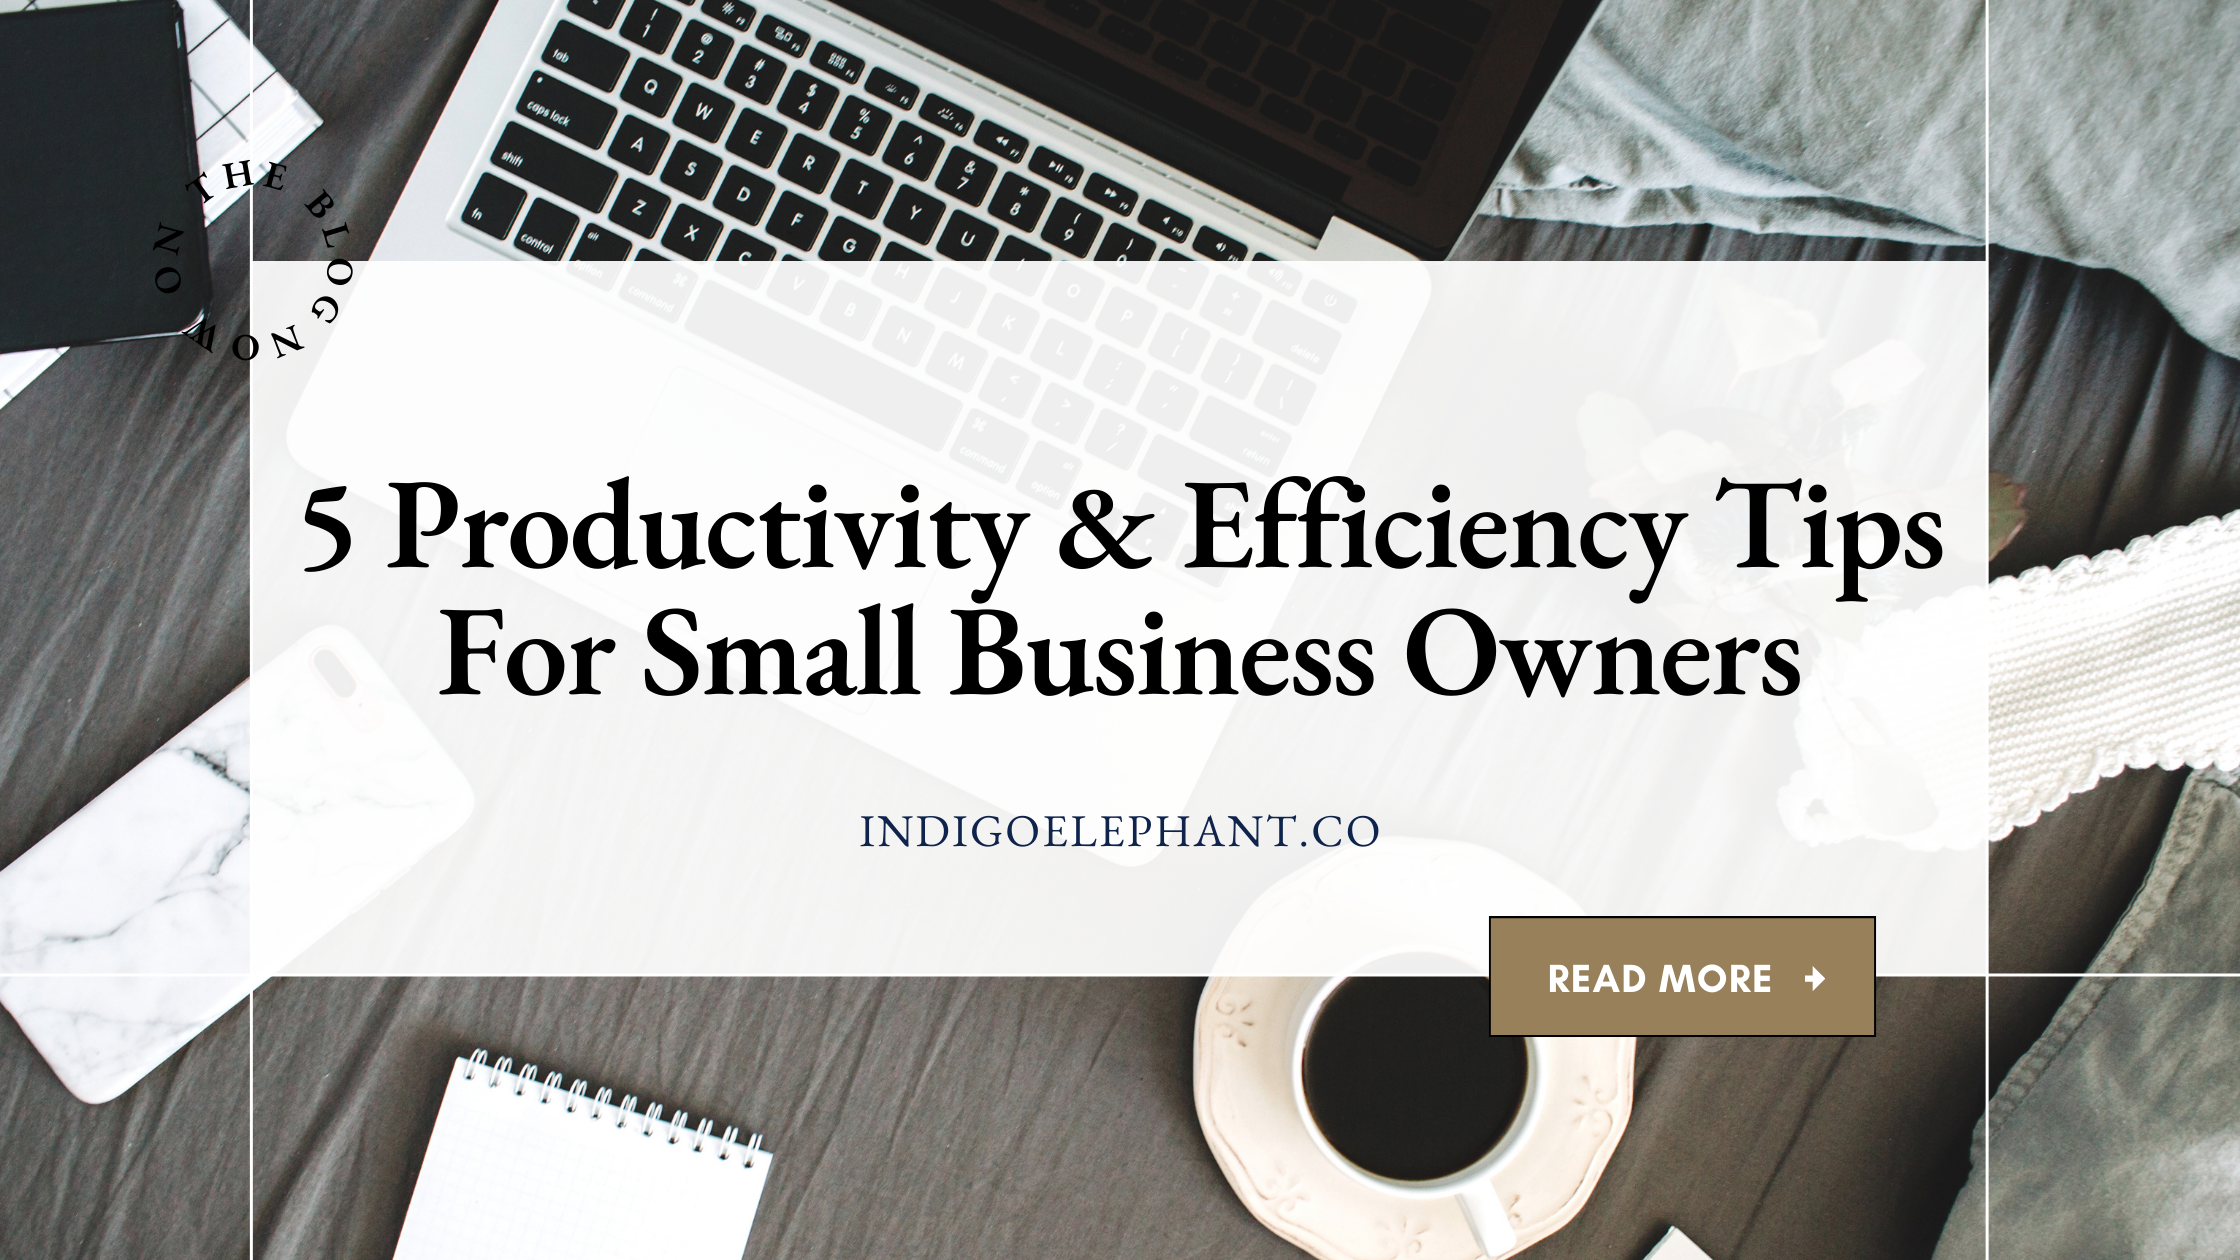 5 Productivity & Efficiency Tips For Small Business Owners